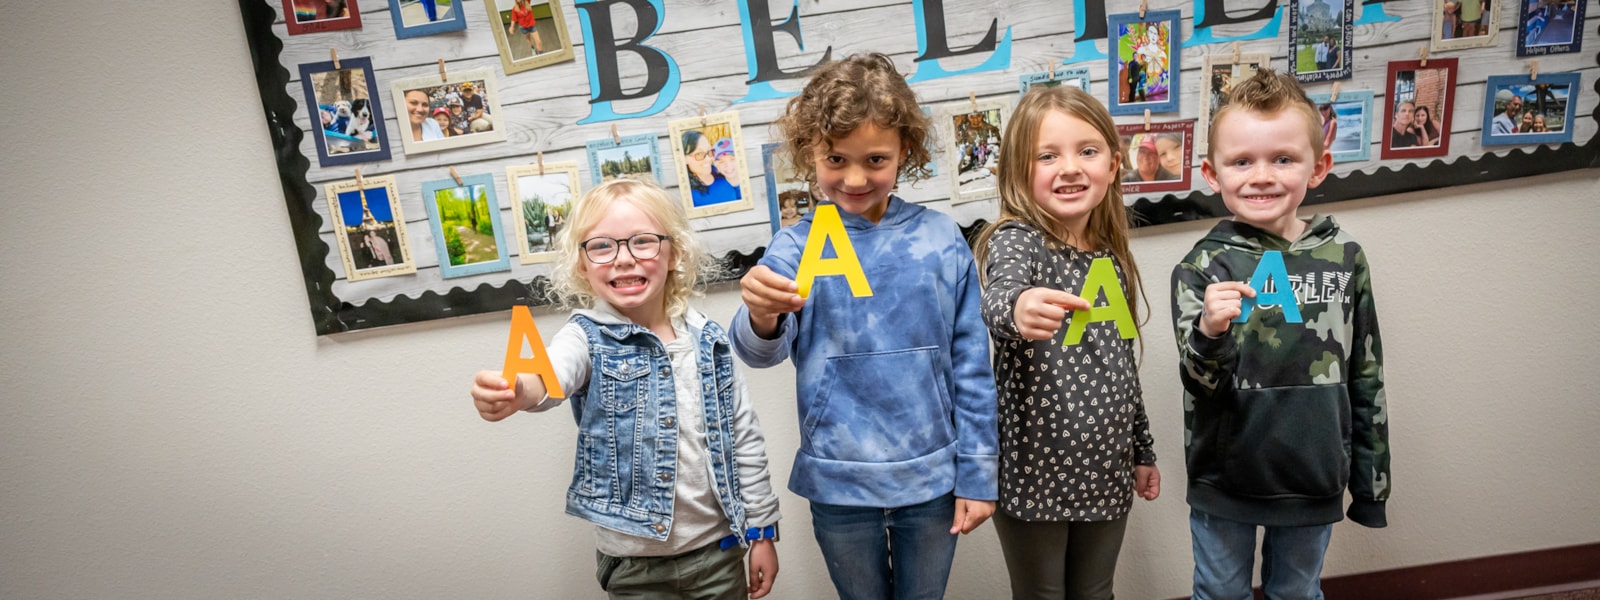 Students holding the letter "A"